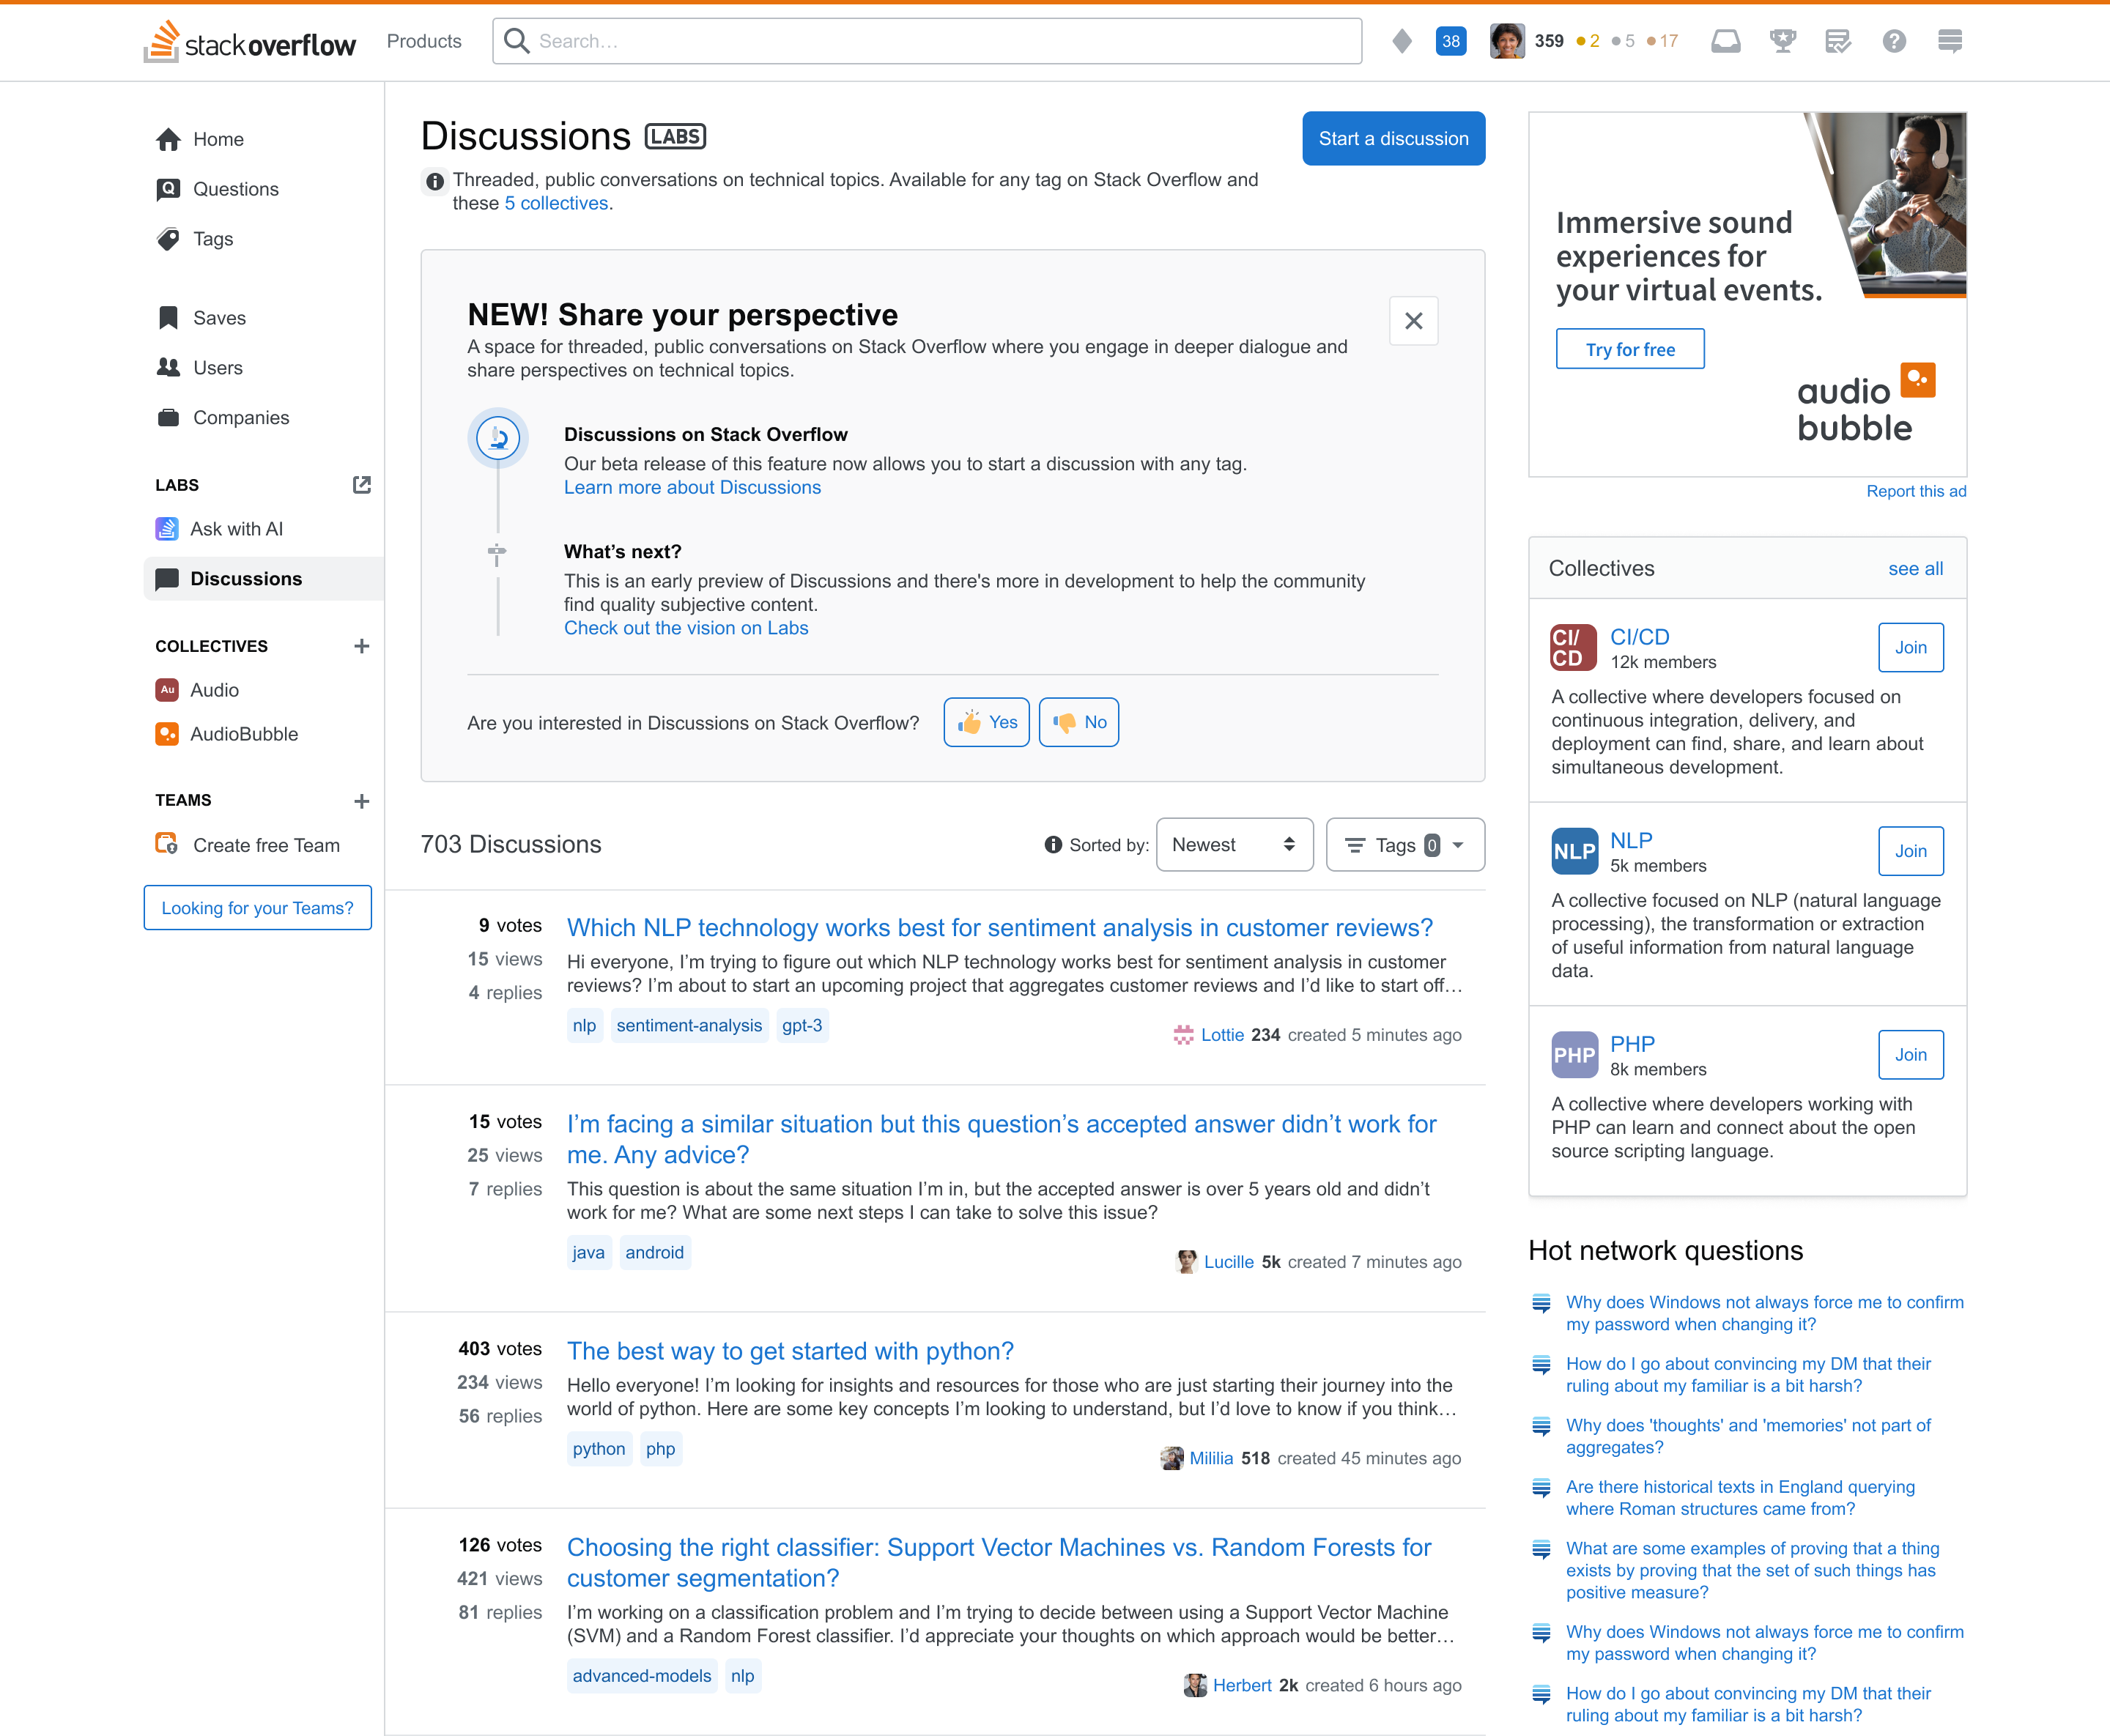 Discussions now taking place across all tags on Stack Overflow